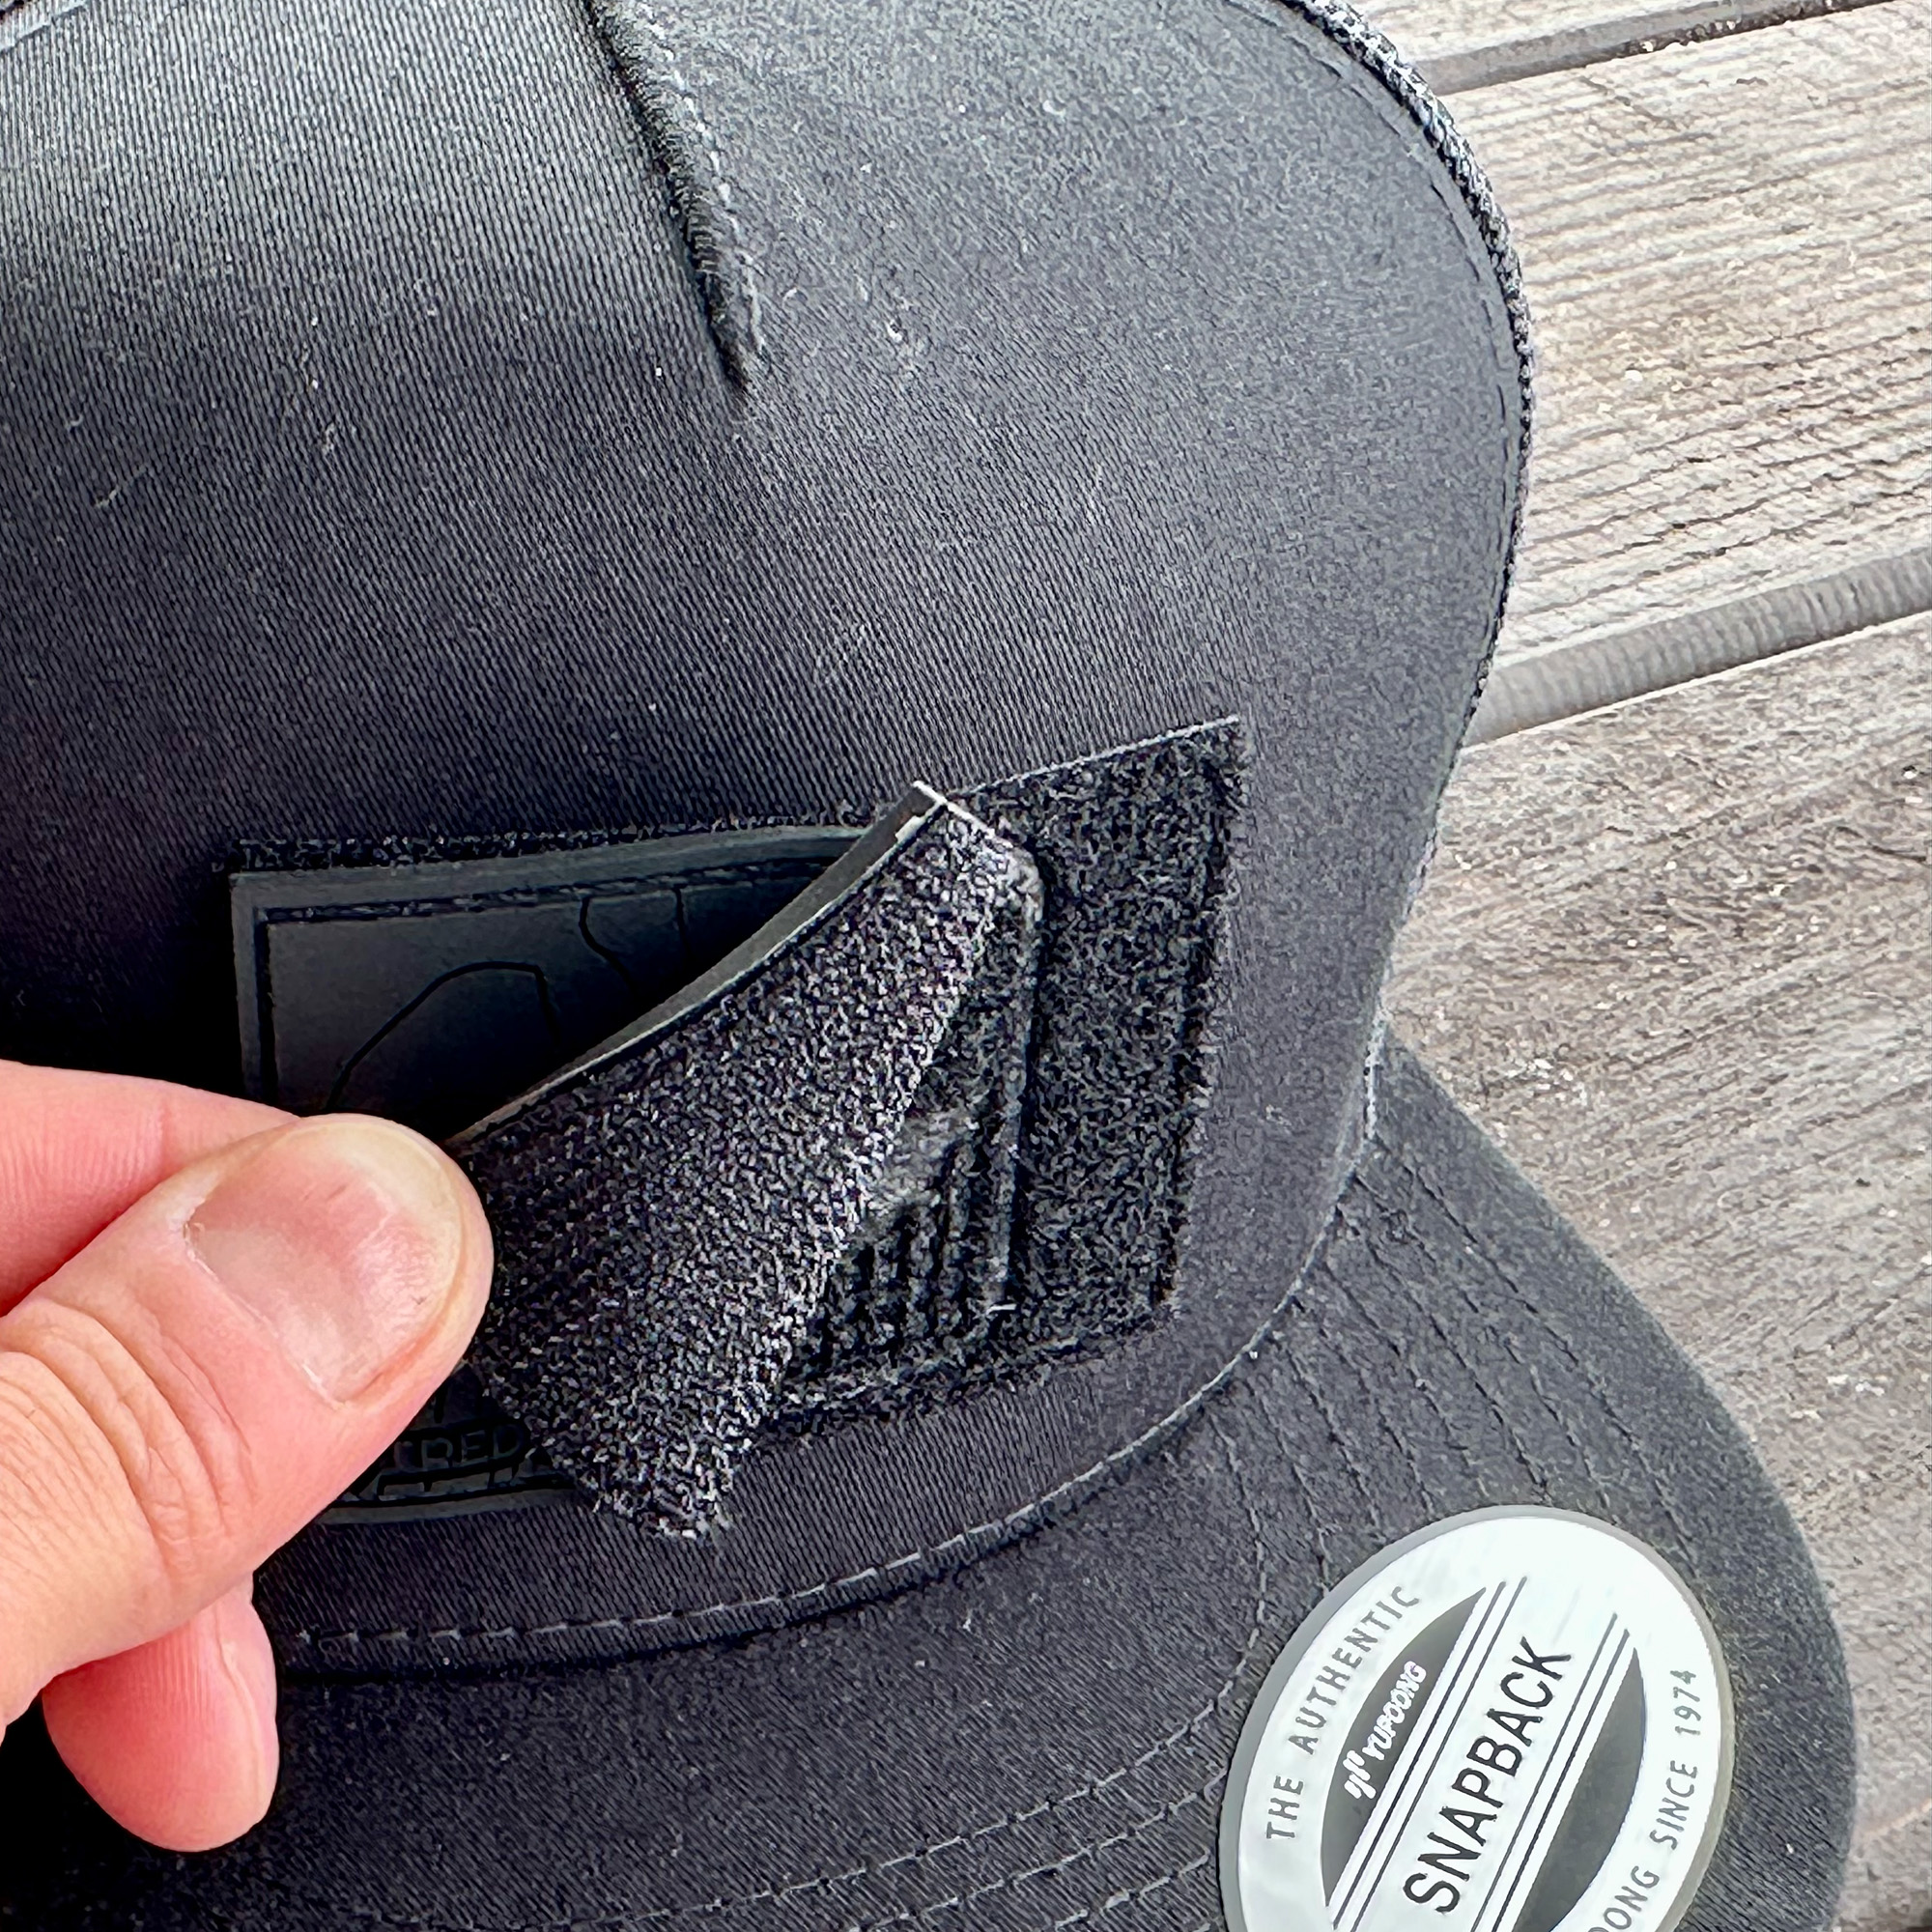 Interchangeable Patch Hat by Canopy Creative Action Network